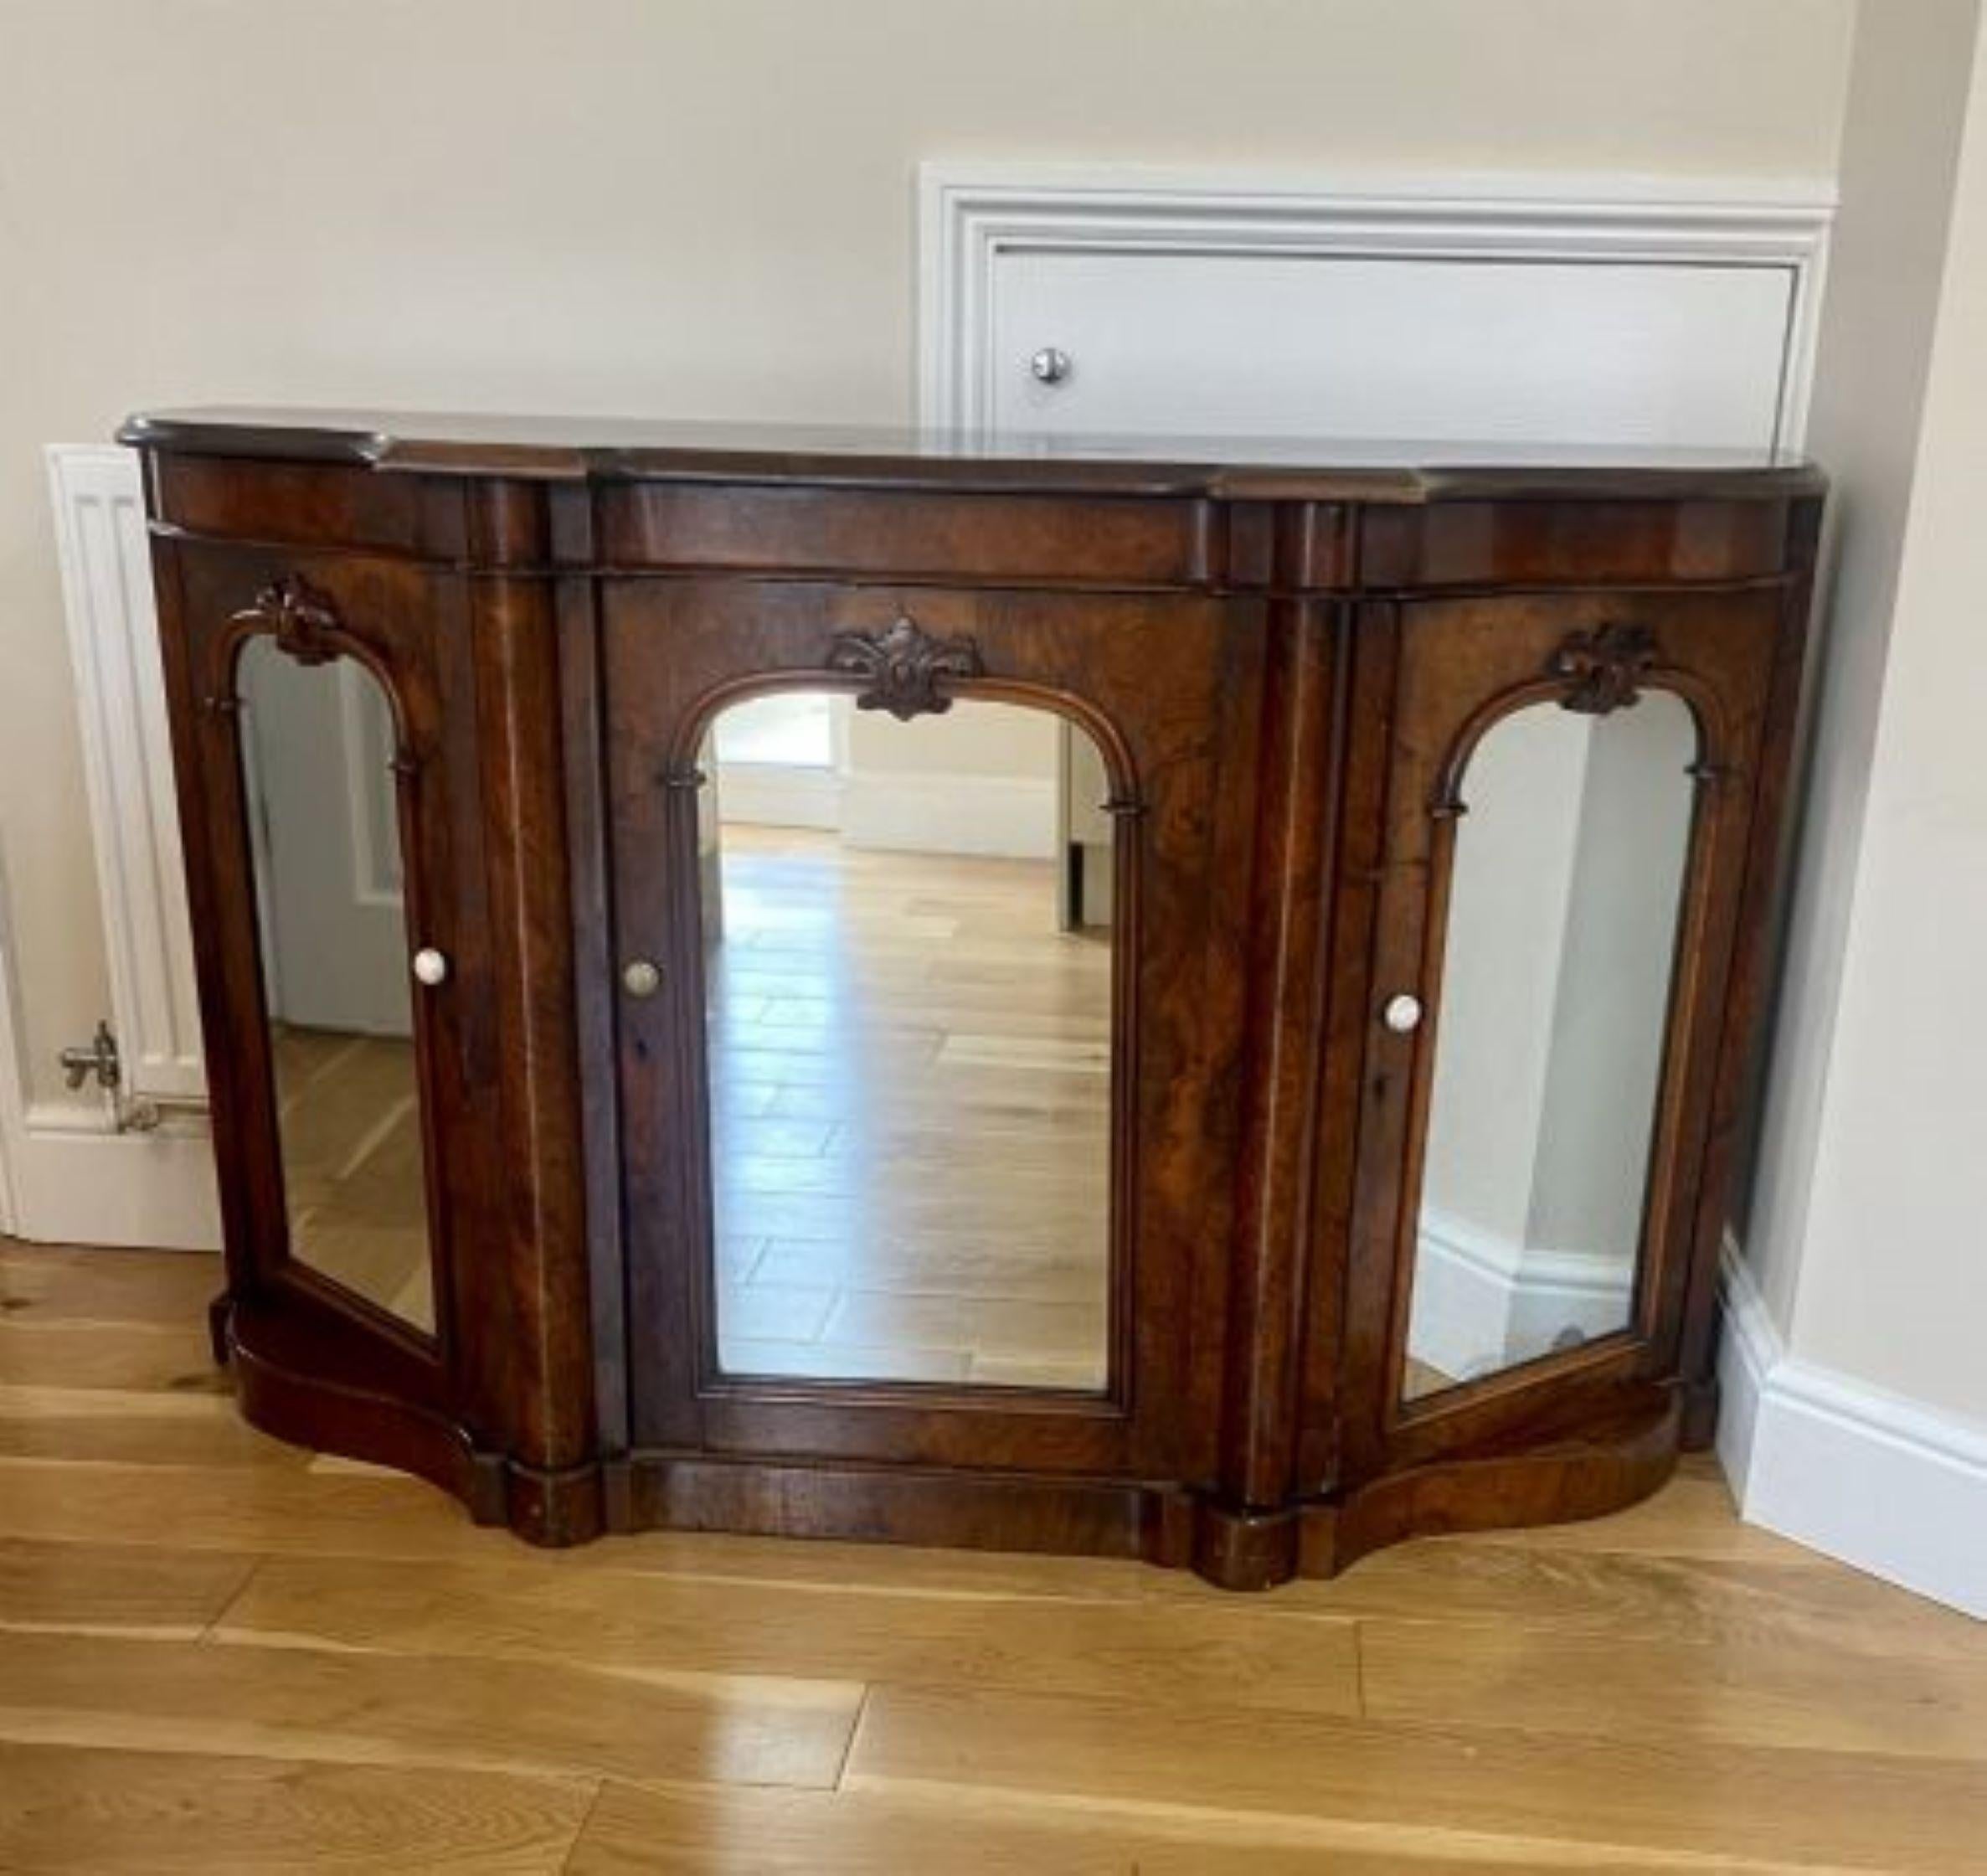 Quality antique Victorian burr walnut mirrored credenza having a shaped top with a thumb moulded edge above a shaped burr walnut freeze, three burr walnut carved doors with original mirrors opening to reveal fitted shelf interiors, standing on a